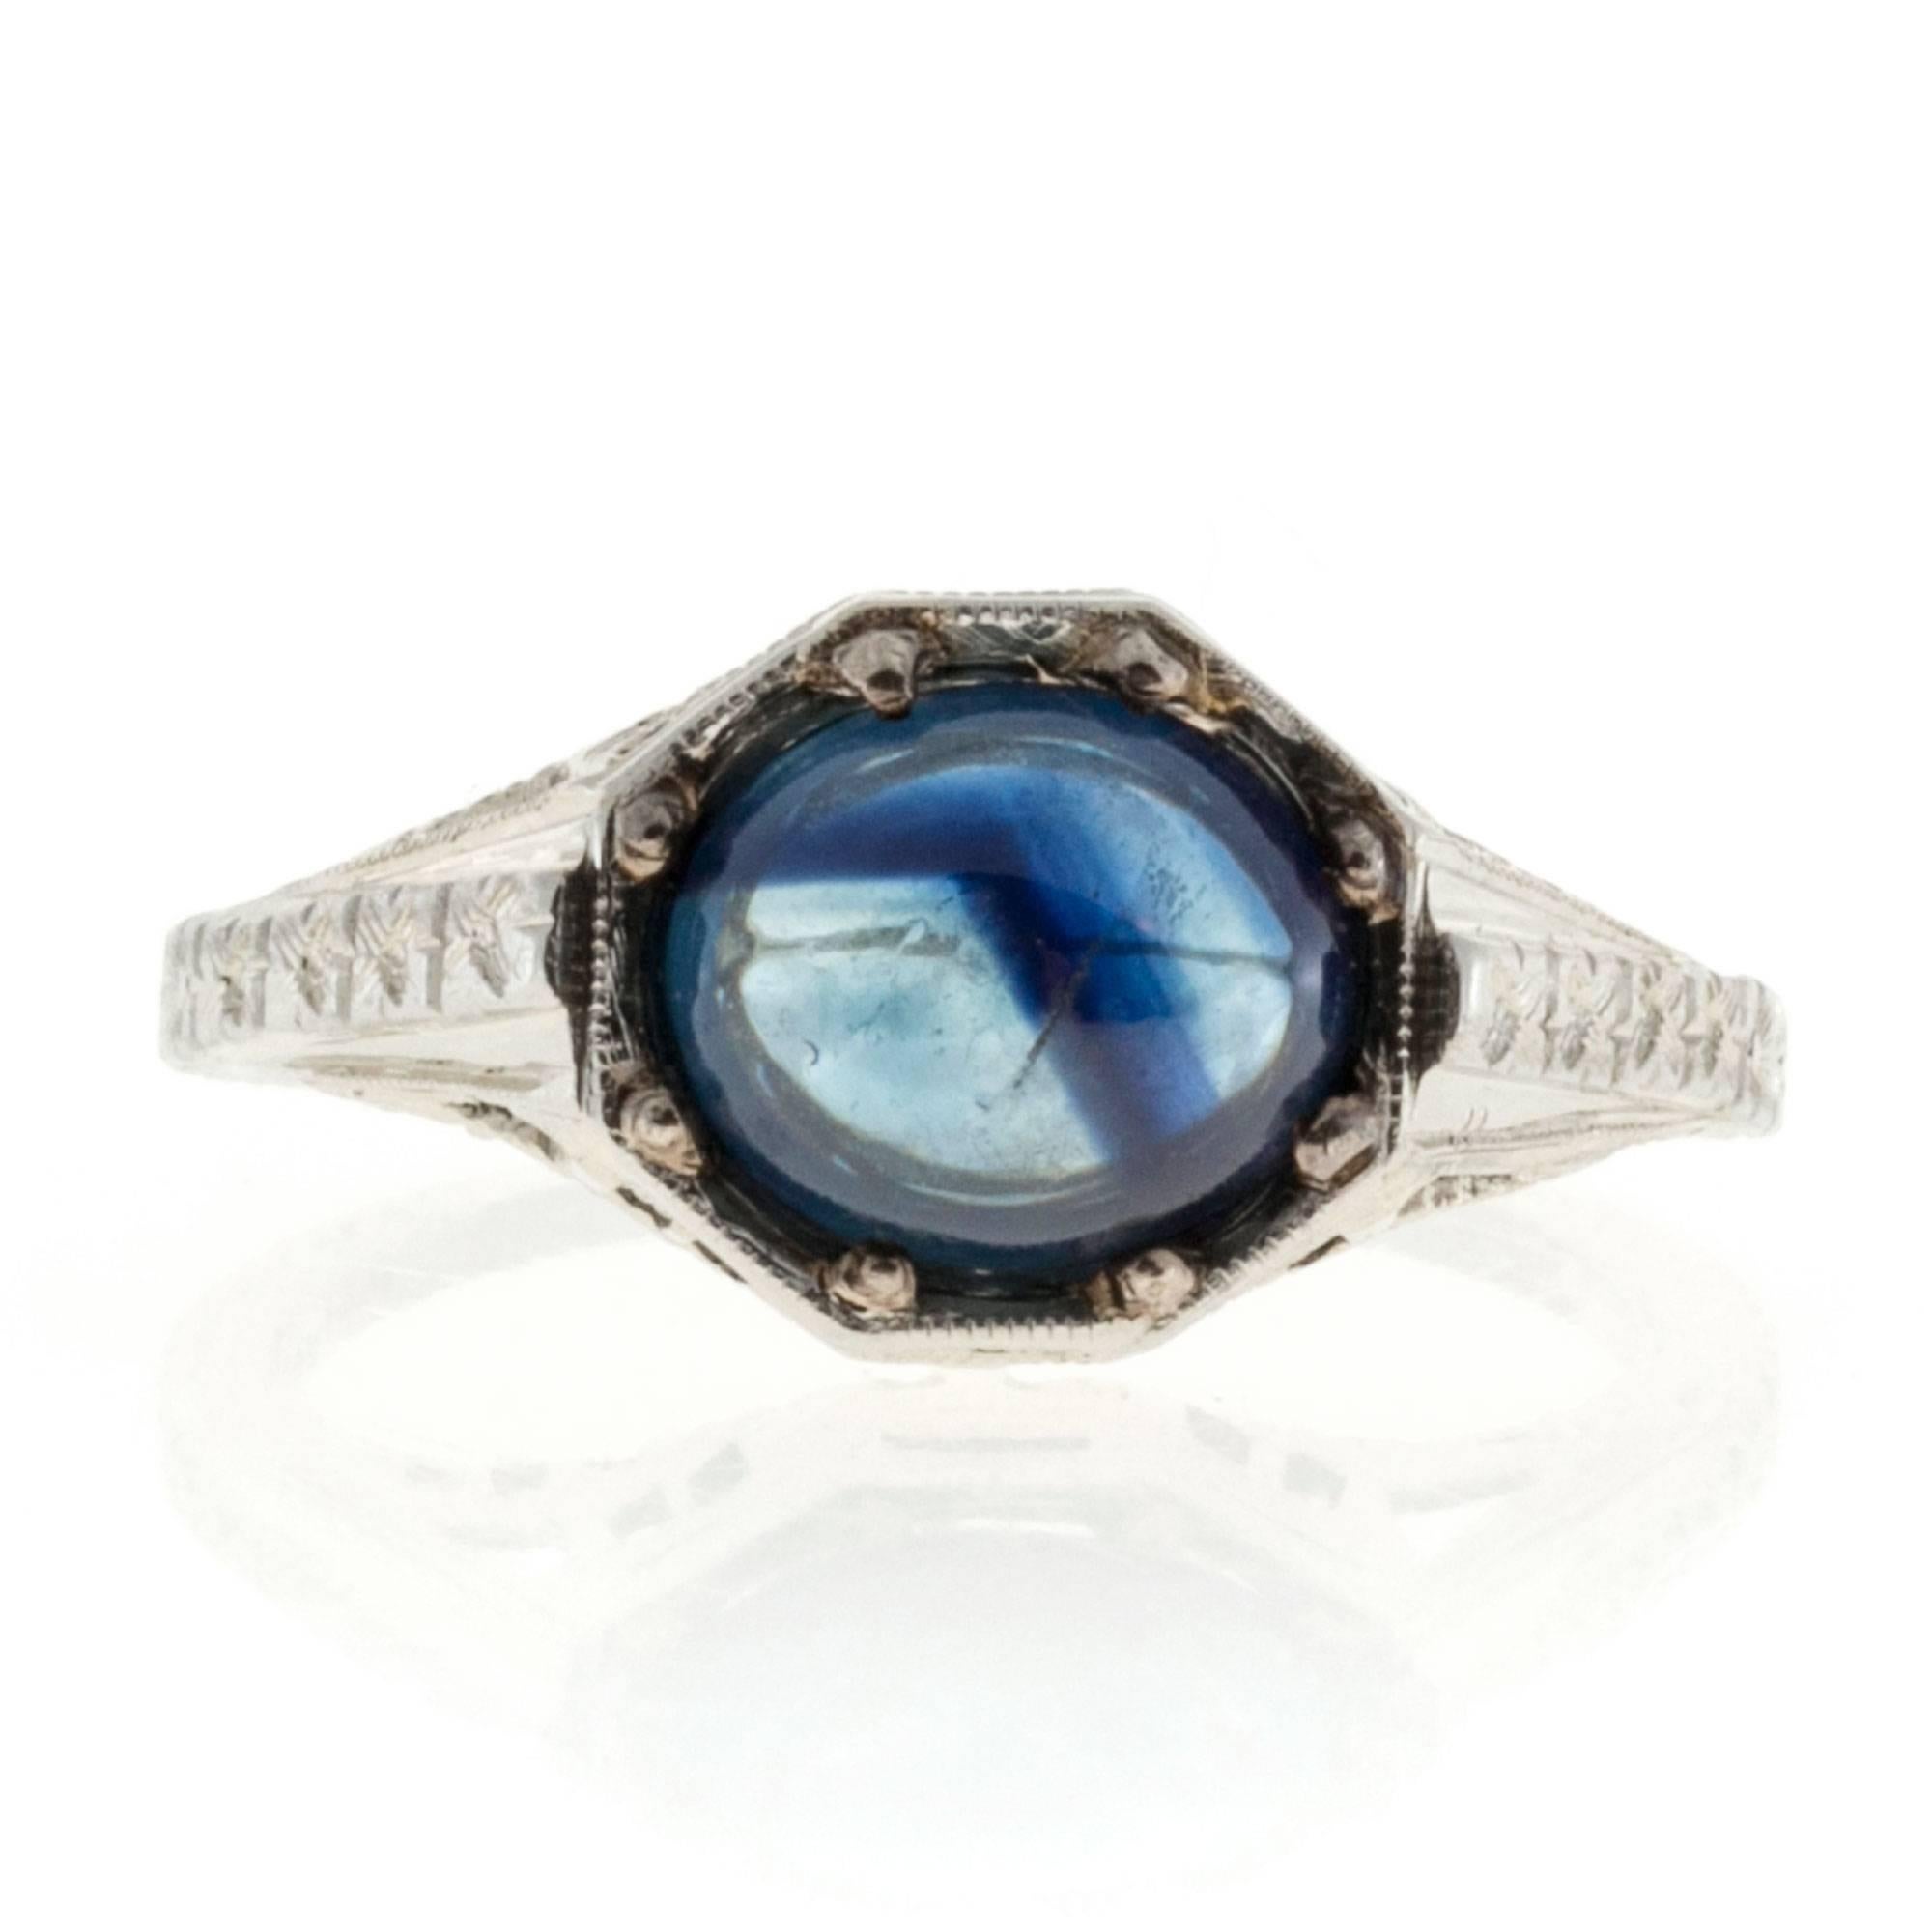 Art Deco handmade 18k white gold and Palladium hand engraved and hand pierced Filigree engagement ring.  The top is Palladium, the ring is 18k white gold.  The top is set with a bright blue oval fine natural sapphire cabochon. 

1 oval cabochon